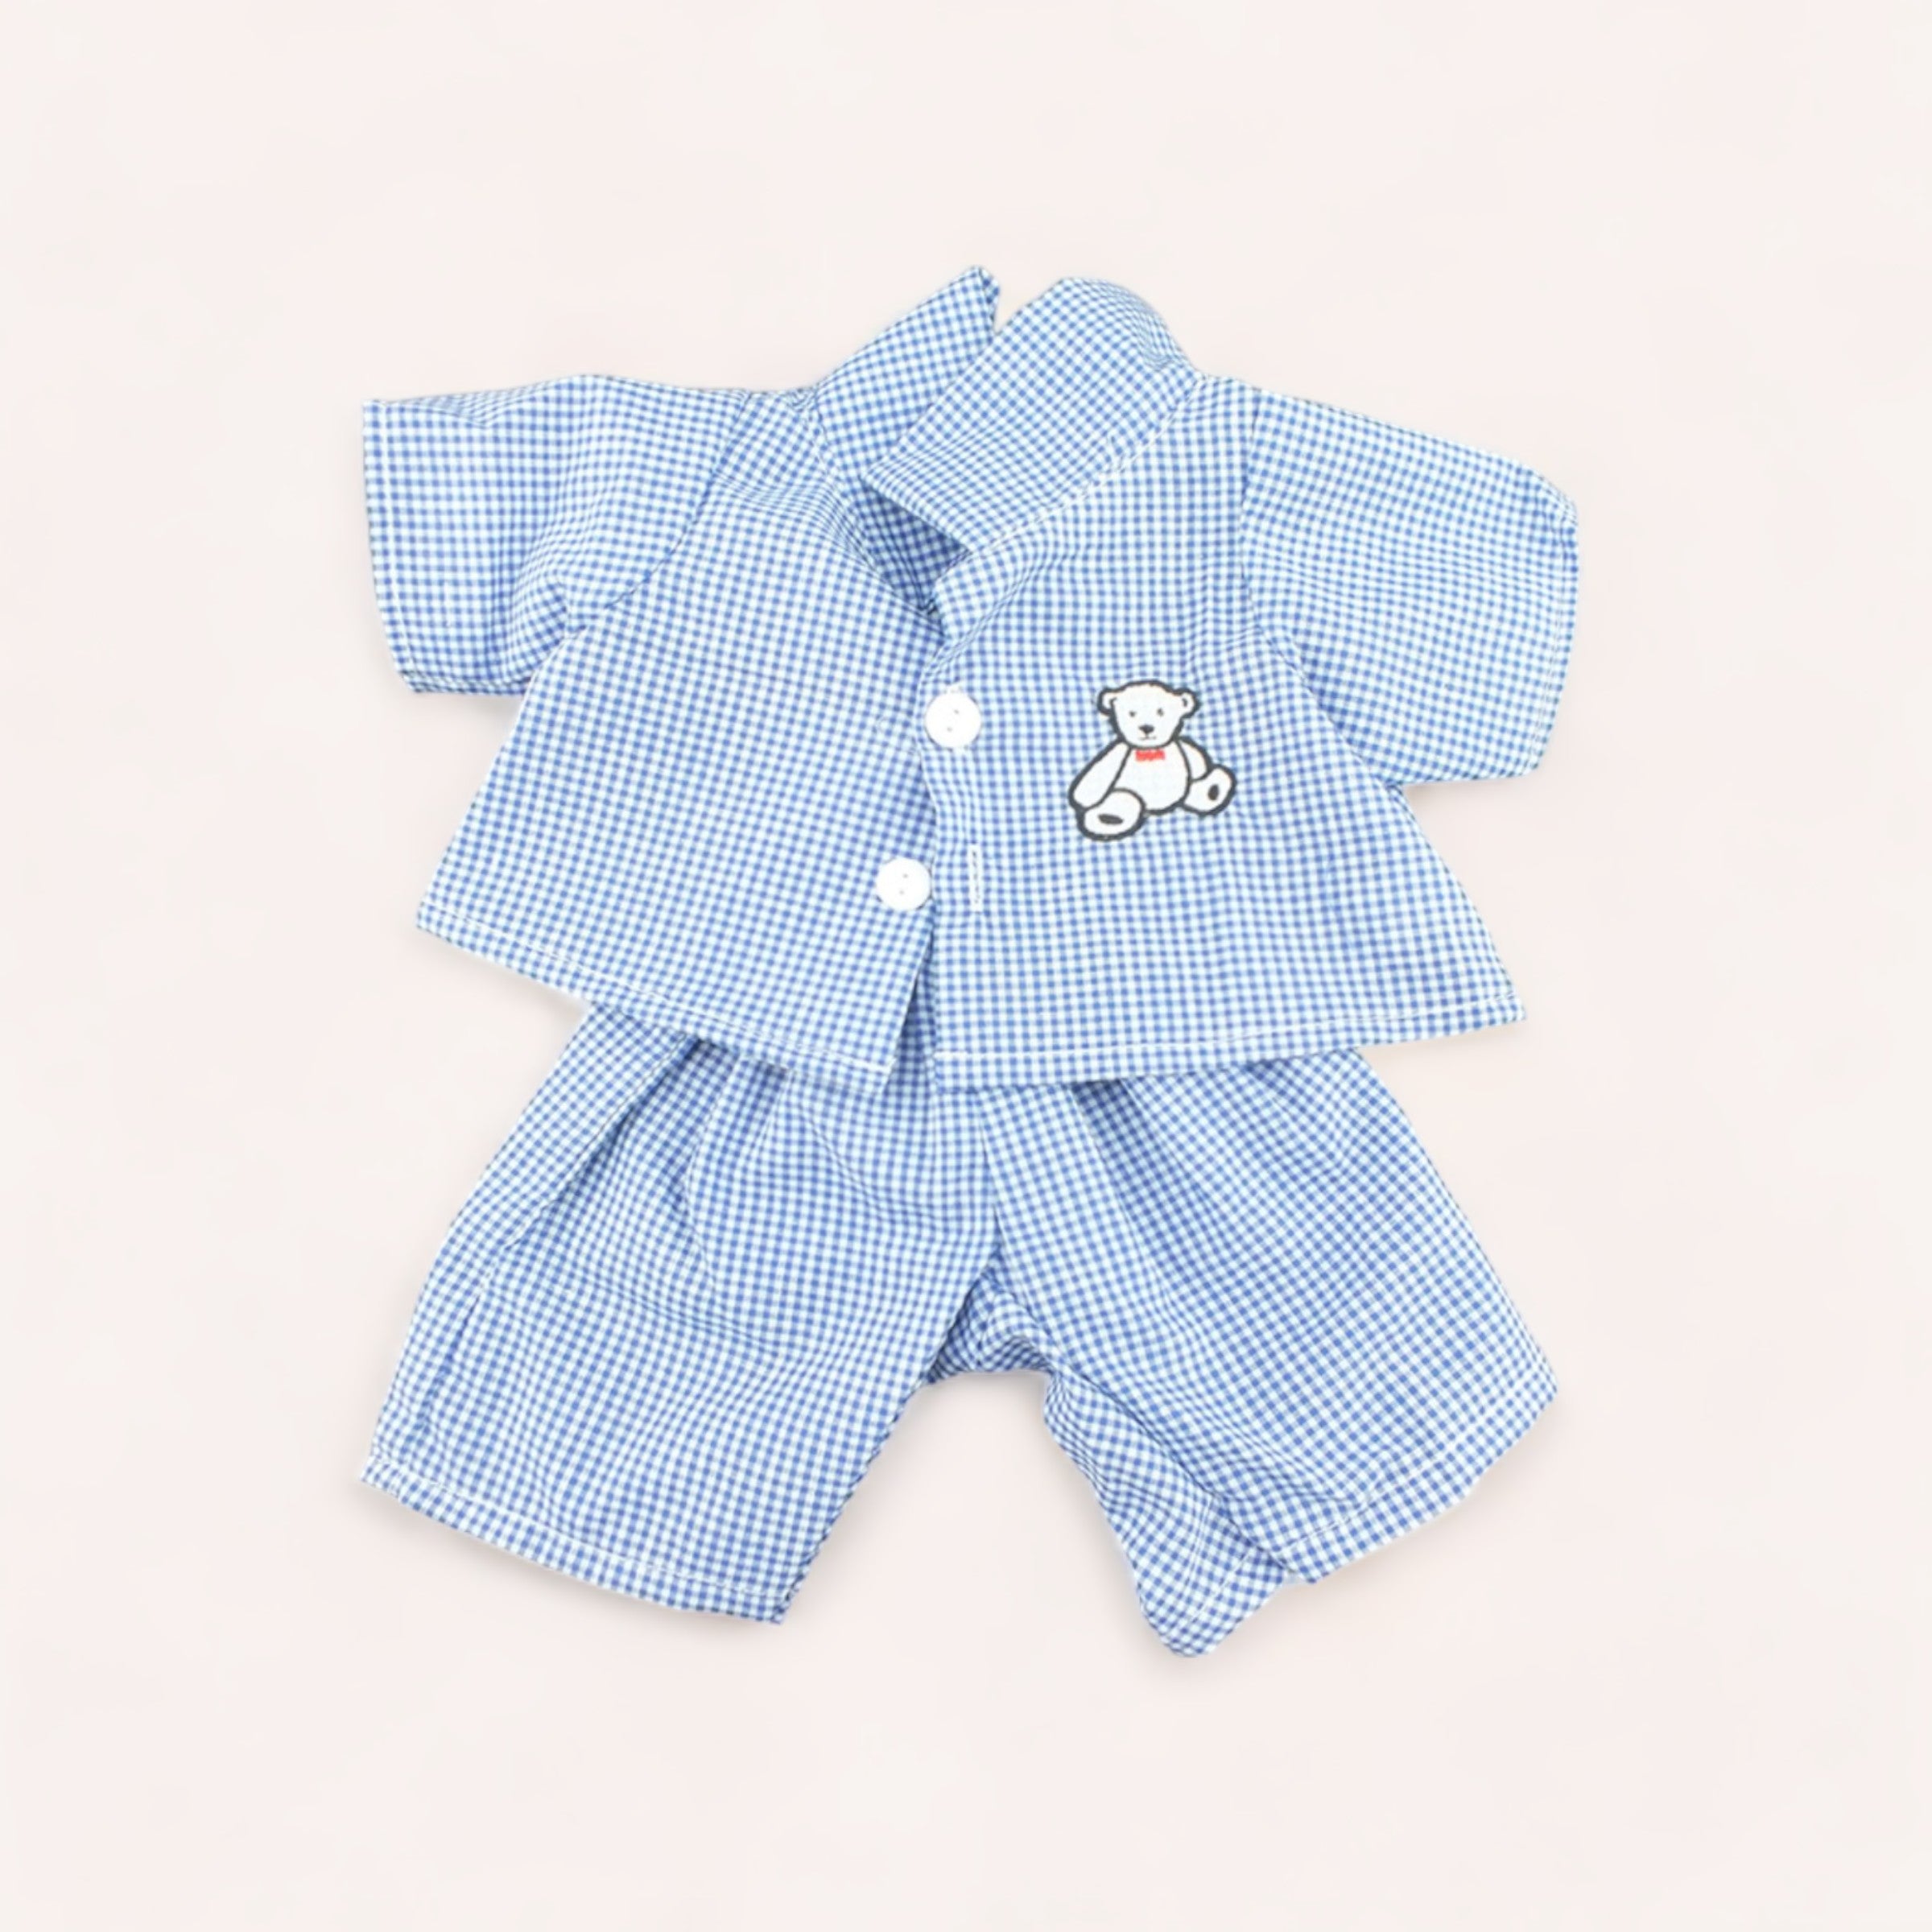 Baby's Bear PJ's Outfit by The Teddy Factory, featuring a white and checkered design with a teddy bear patch on a white background, perfect for the bedtime routine.